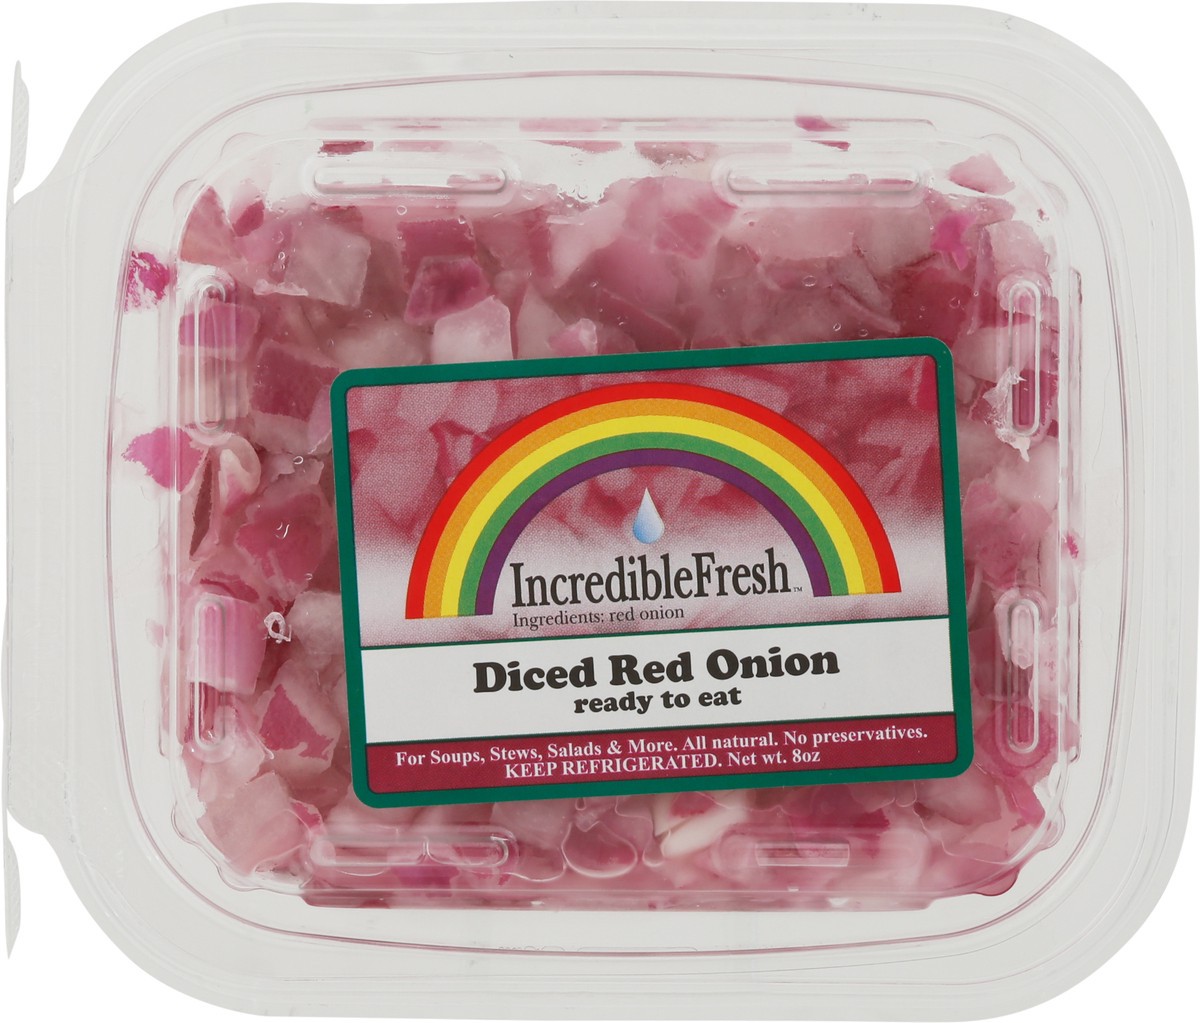 slide 5 of 11, IncredibleFresh Incredible Fresh Diced Red Onions, 8 oz